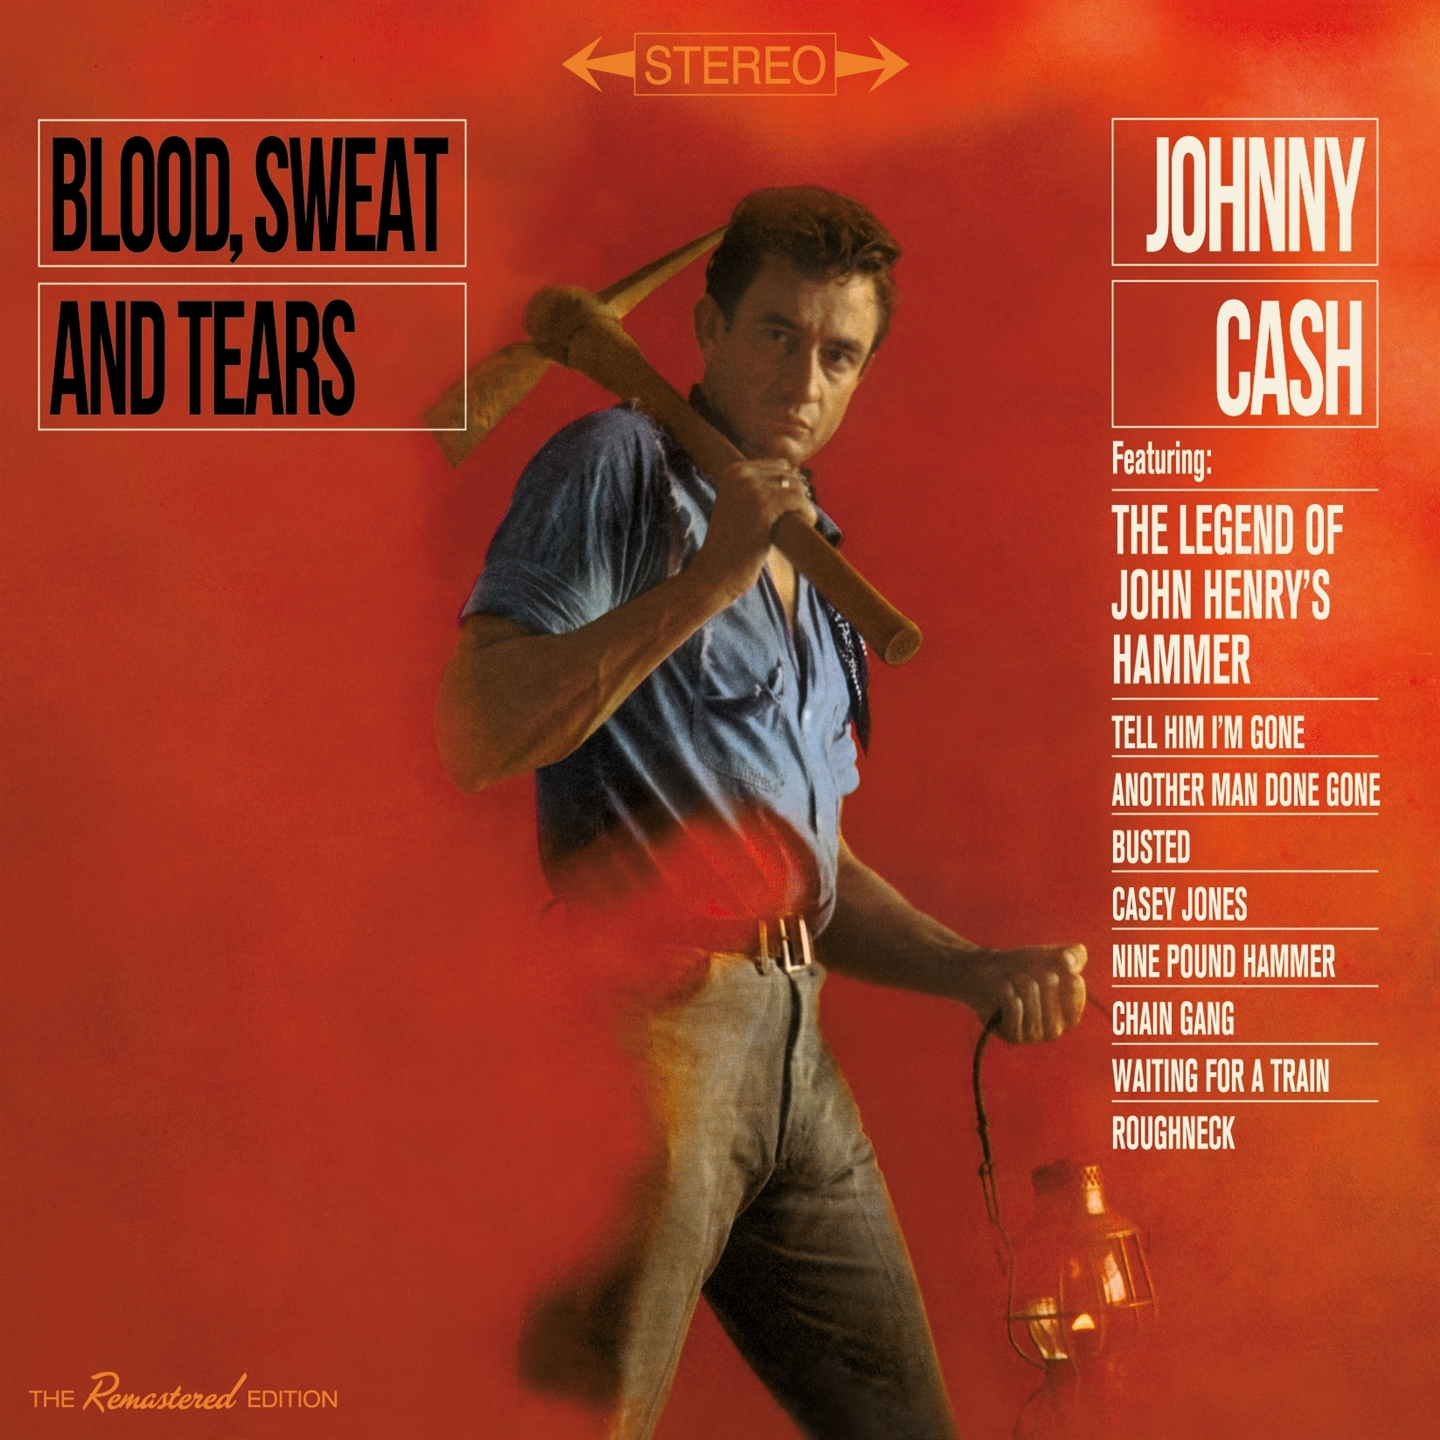 BLOOD, SWEAT AND TEARS (+ NOW HERE'S JOHNNY CASH)